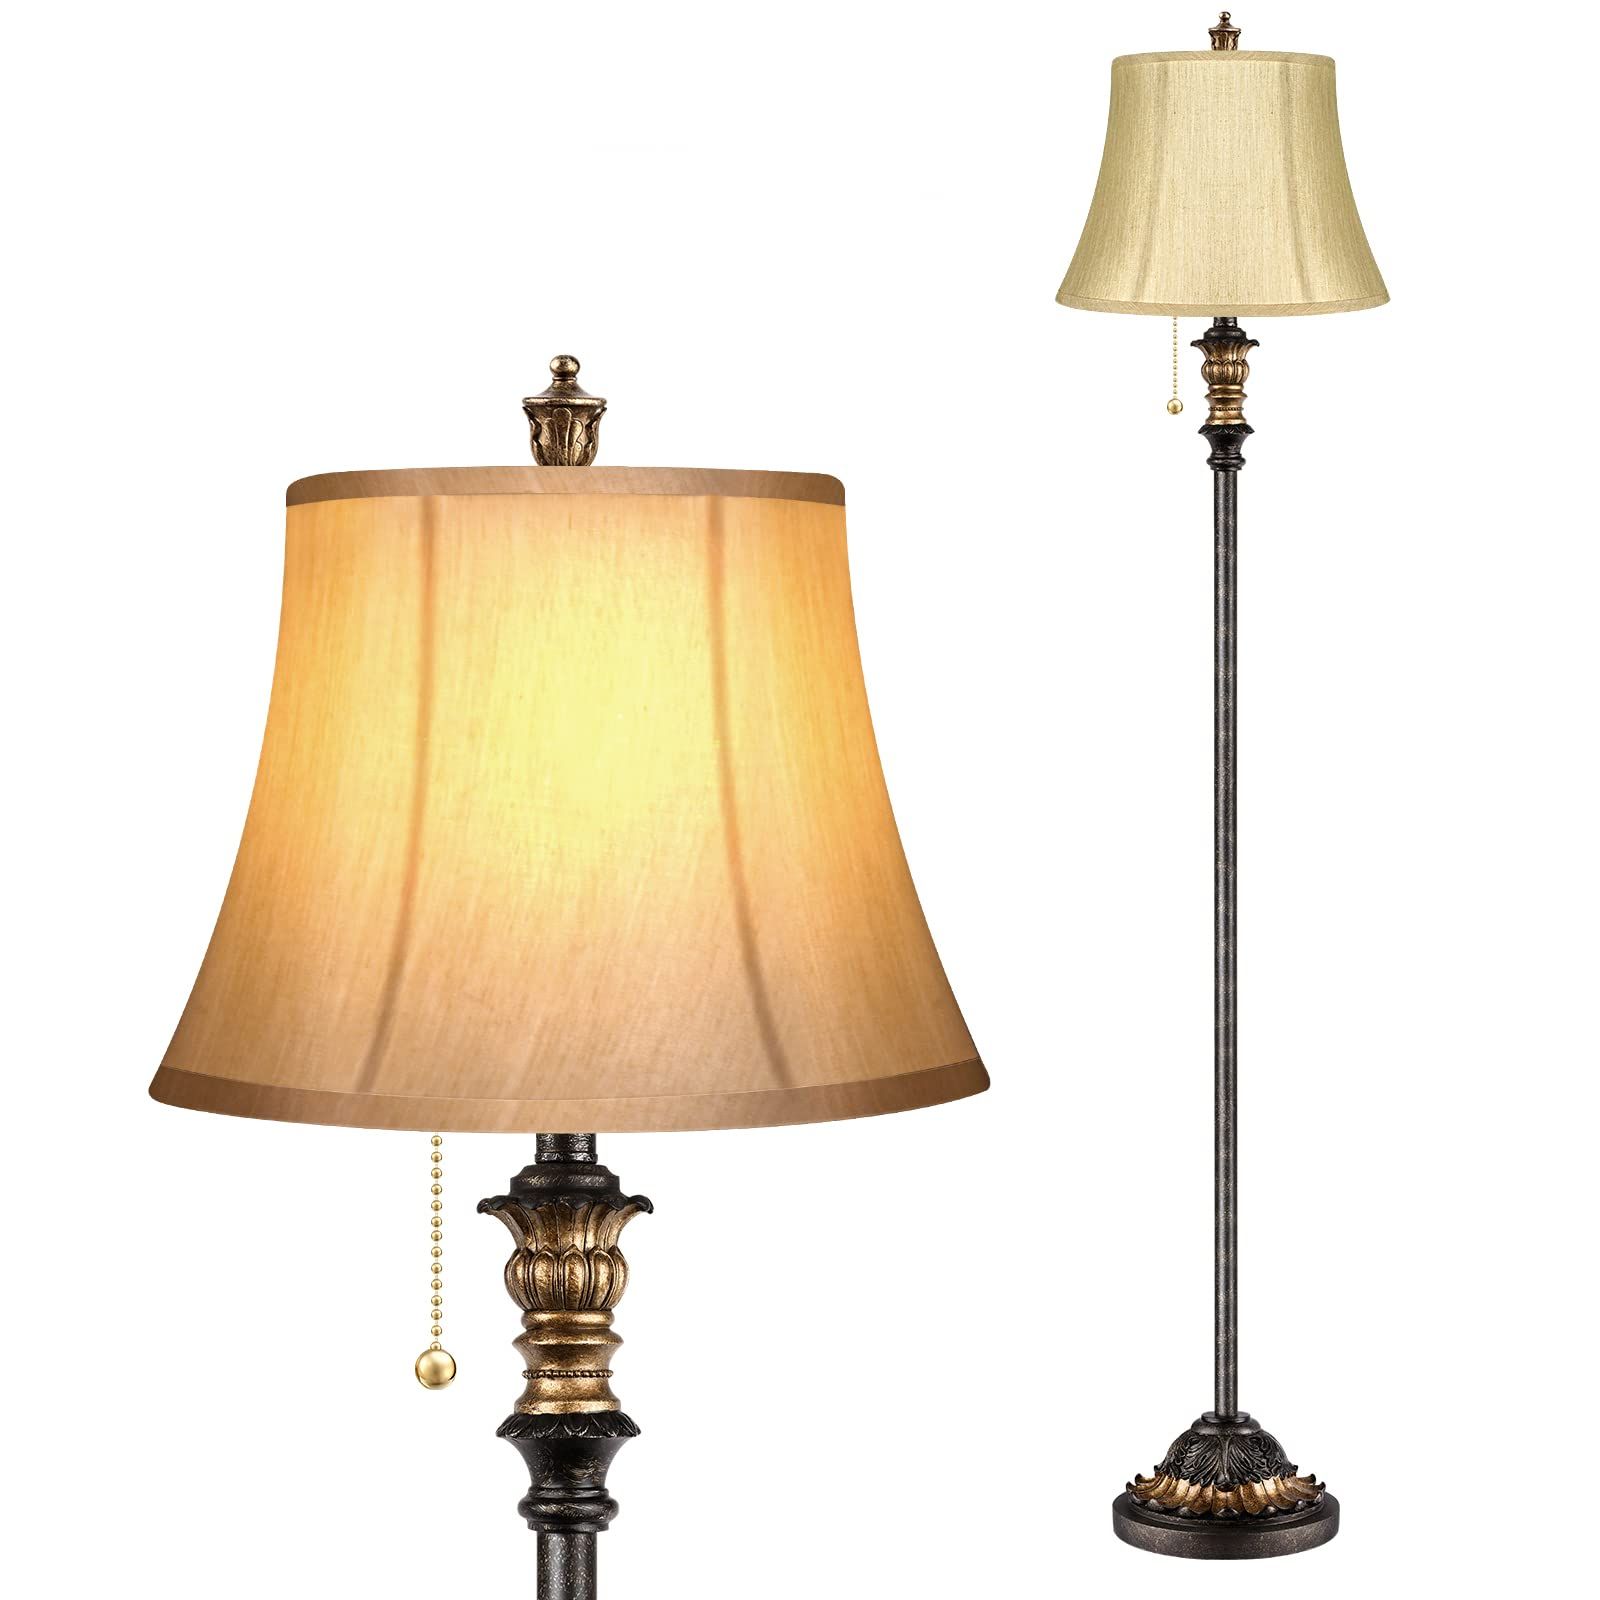 Traditional Standing Lamps With Well Liked Partphoner Traditional Floor Lamp, Classic Standing Lamp With Silk Fabric  Lampshade Bronze Vintage Tall Pole Lamp For Living Room Bedroom Office  Rustic Upright Floor Light With Pull Chain Switch (View 3 of 10)